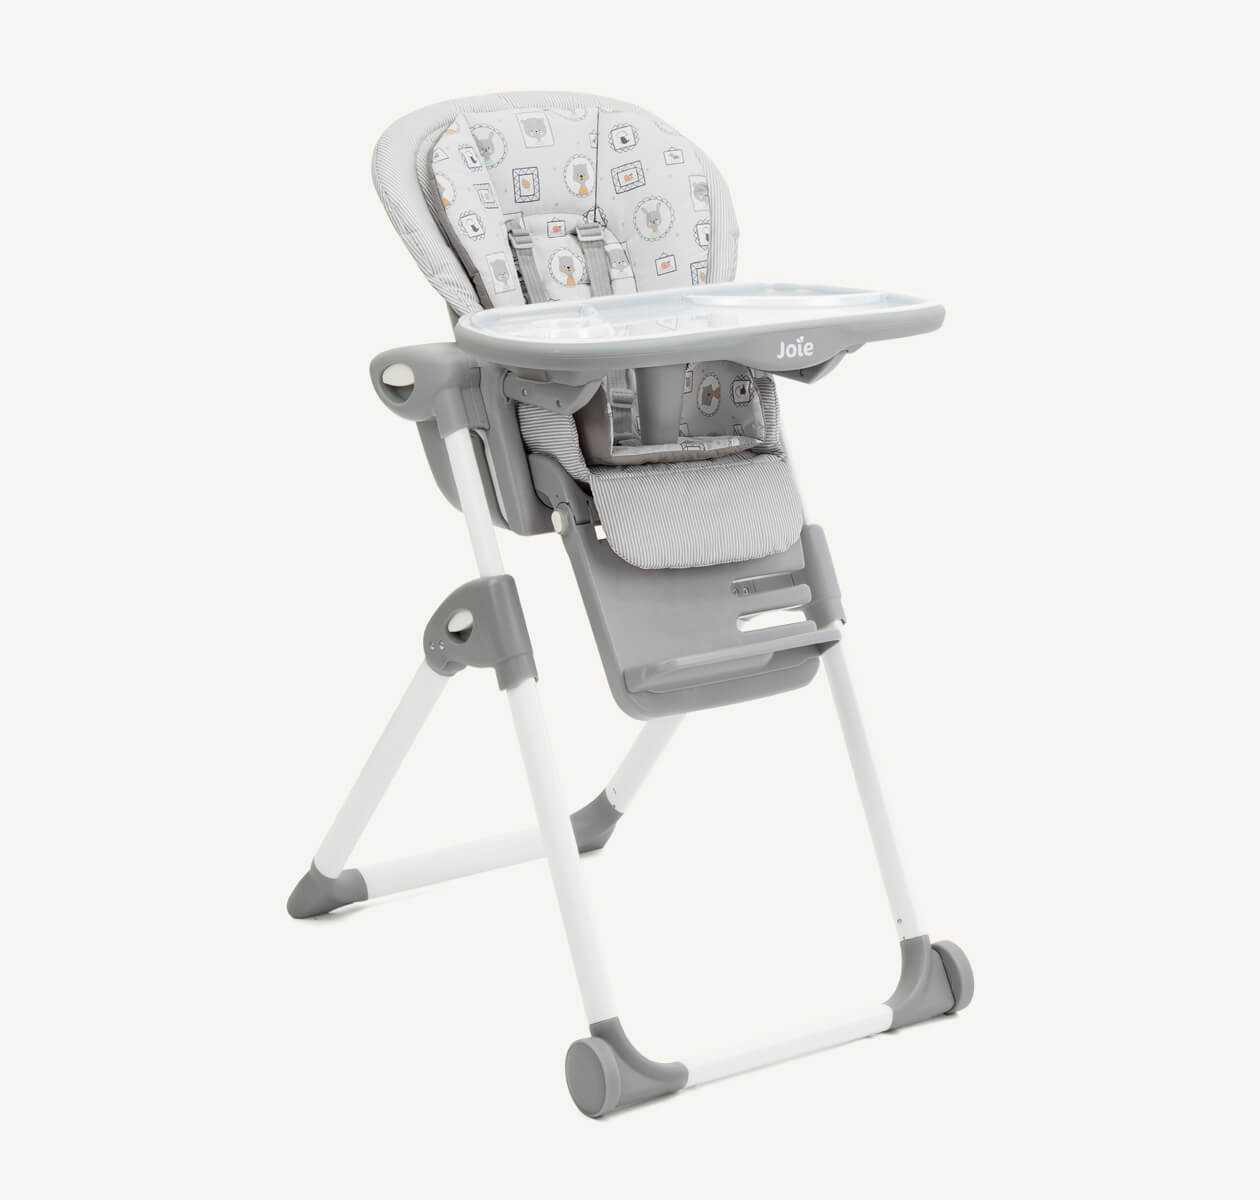 Joie Mimzy Recline from birth highchair with white and gray legs, gray seat pad and gray insert with a pattern of animals in portraits, facing to the right at an angle.